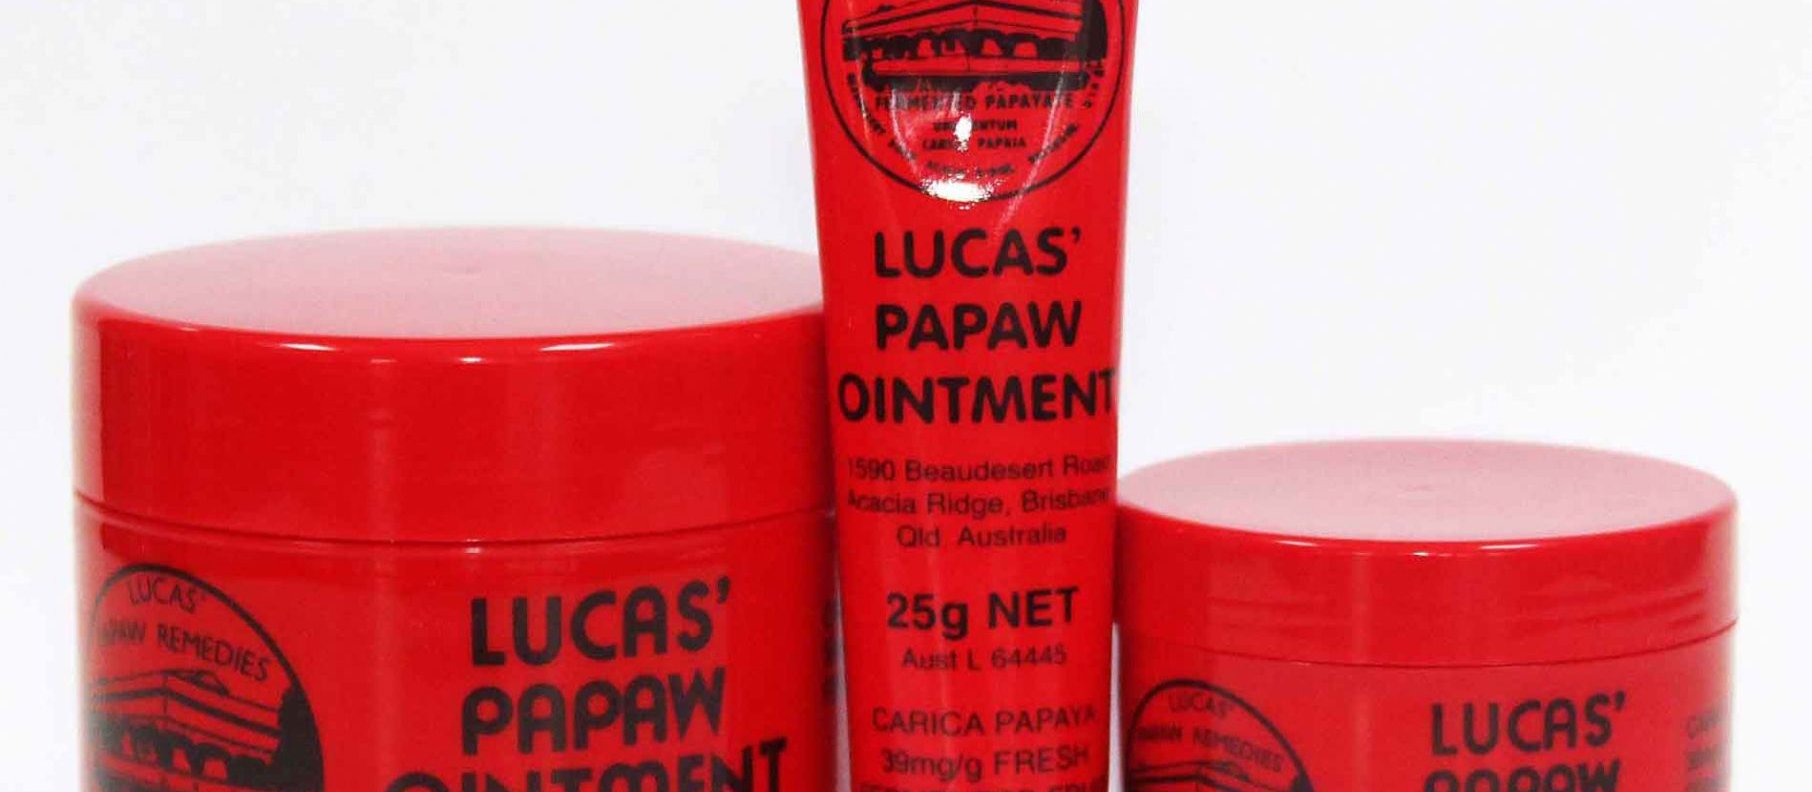  Lucas’ Papaw Ointment